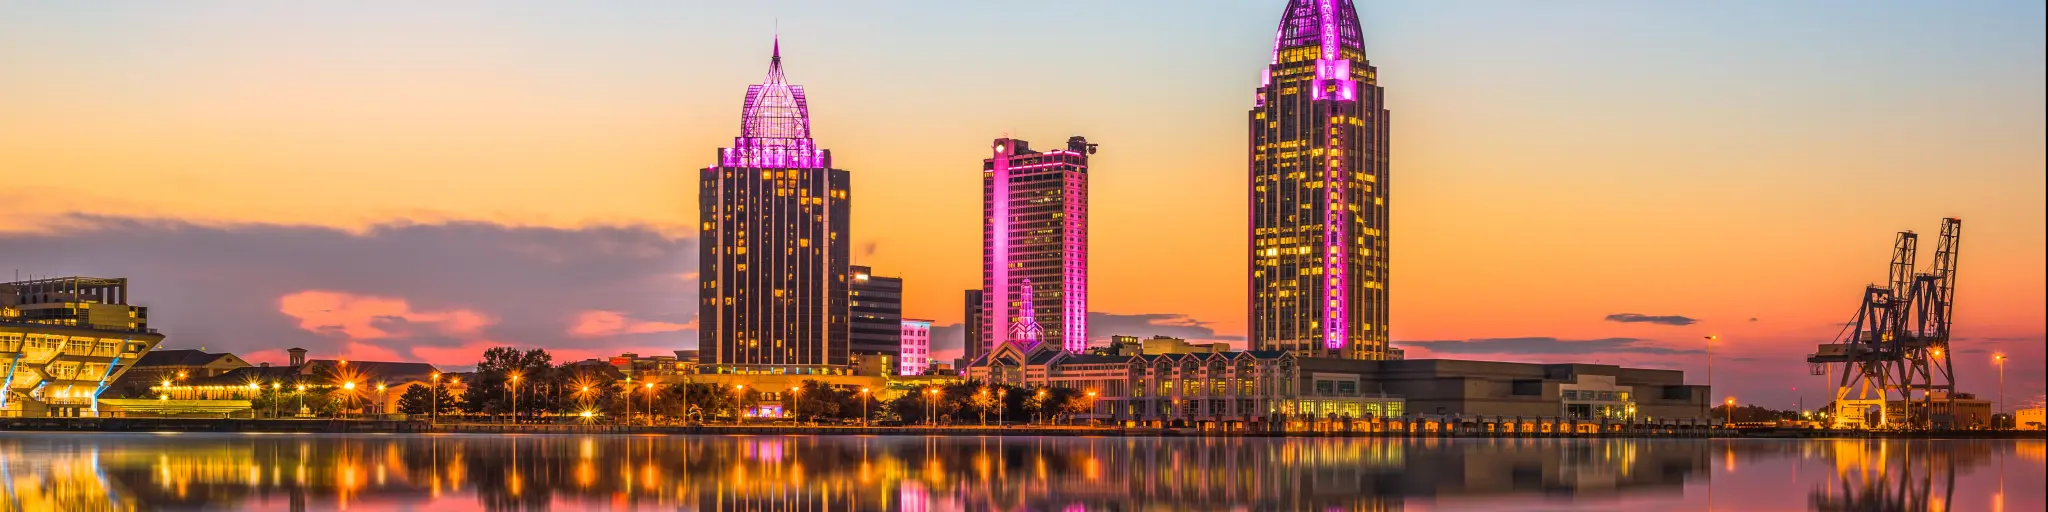 Mobile, Alabama, USA with a large expanse of water in the foreground and the downtown skyline in the distance reflecting in the water at dusk.